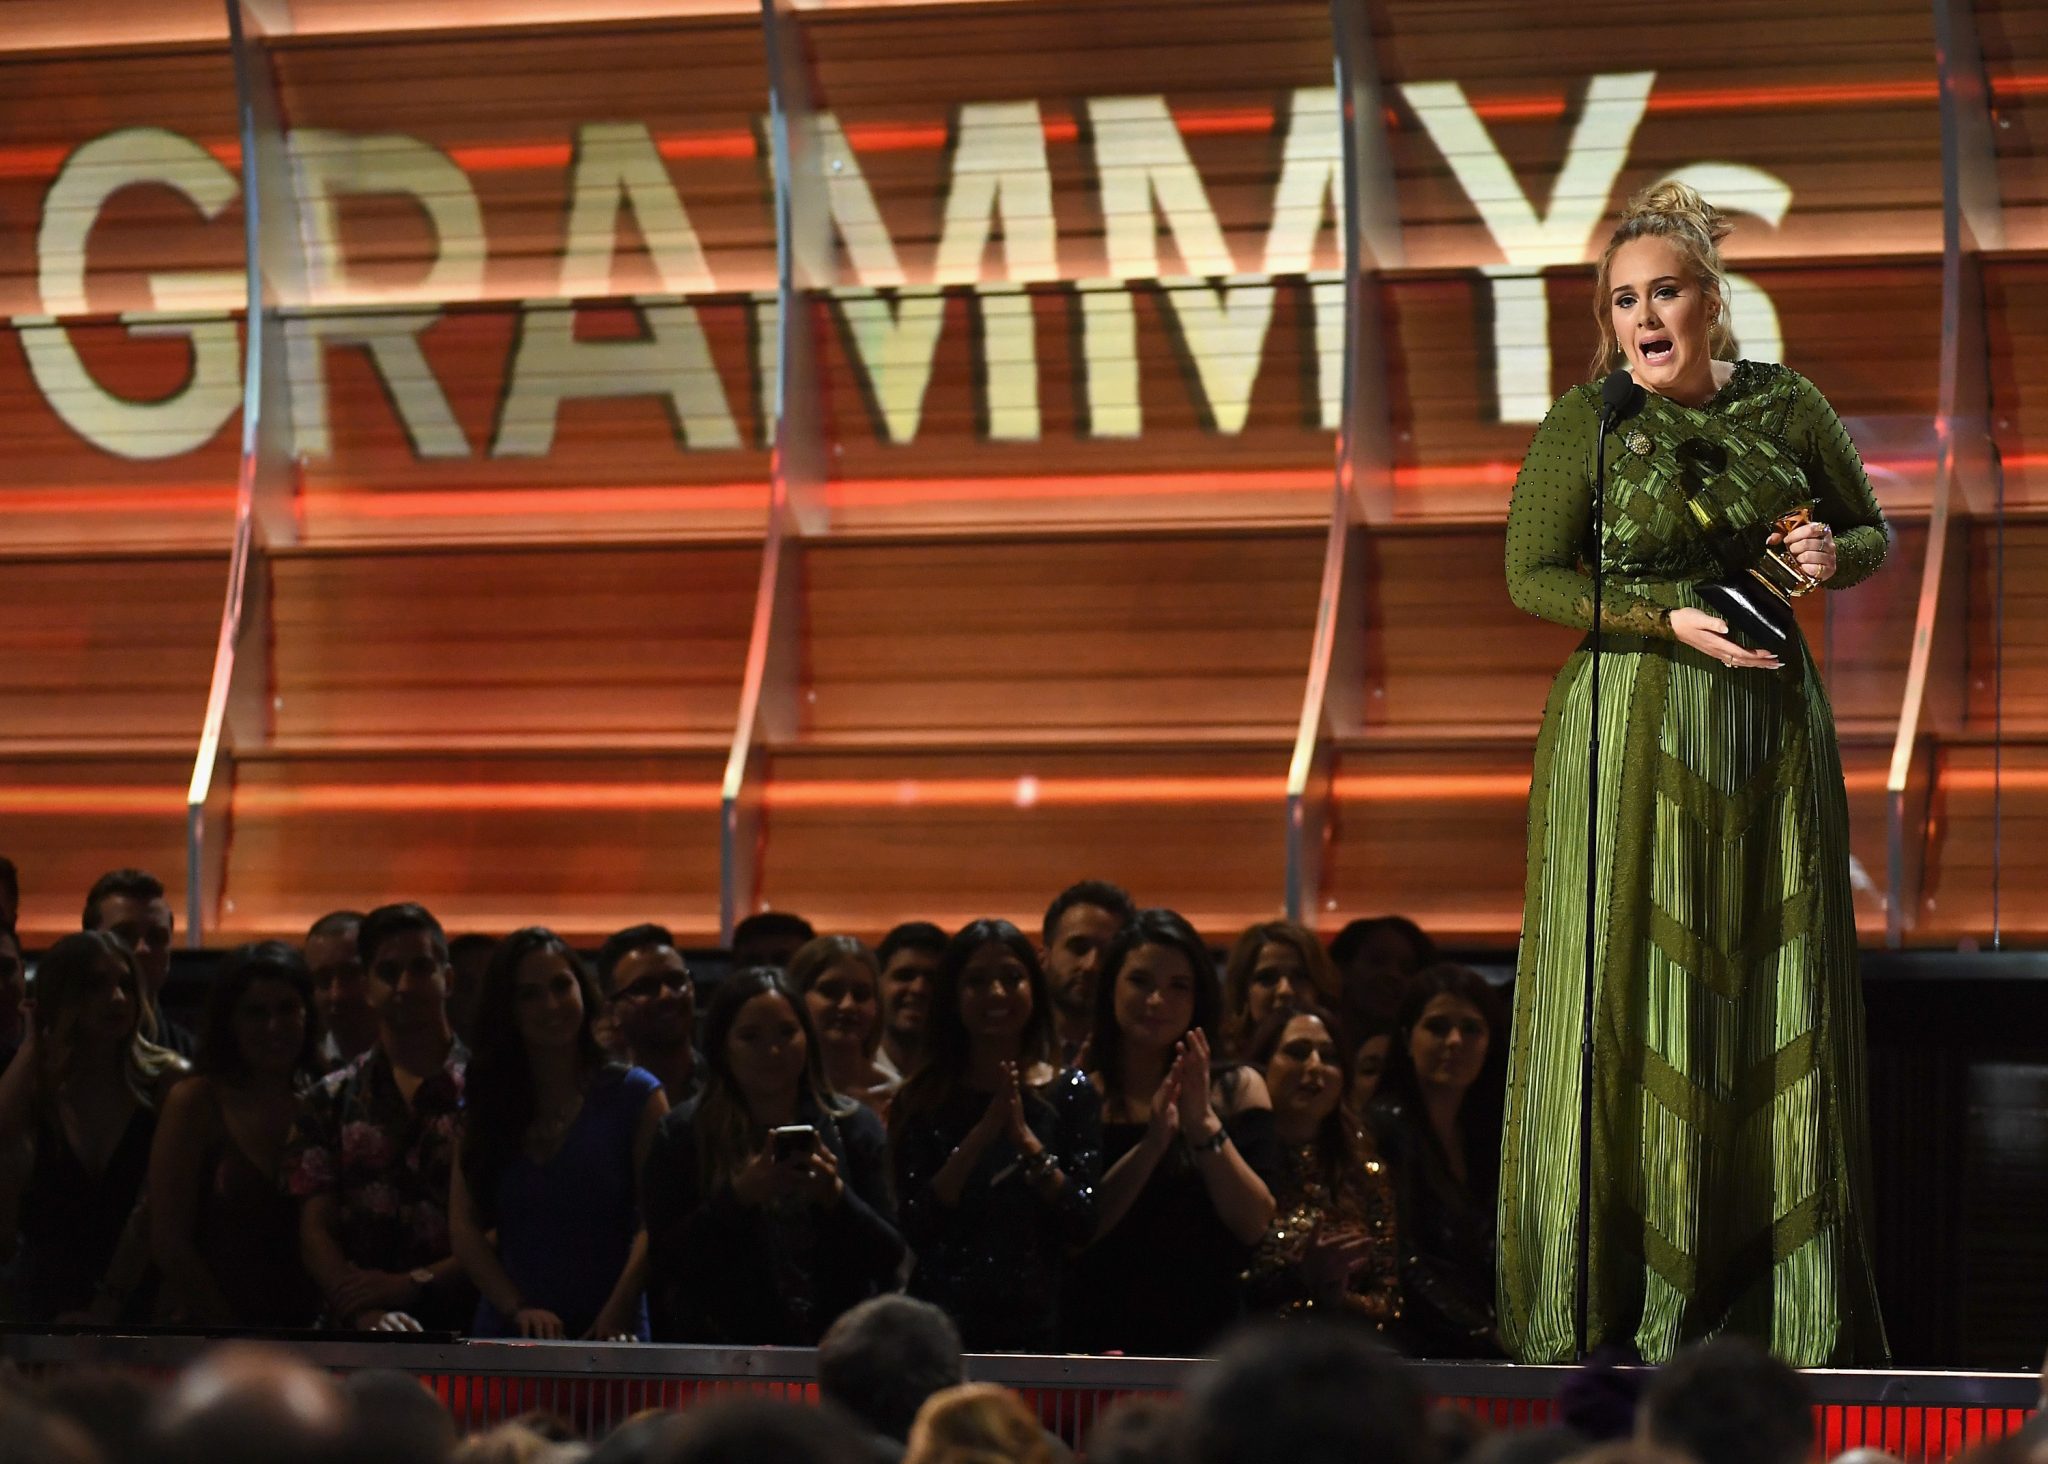 LOS ANGELES, CA - FEBRUARY 12: Recording artist Adele accepts the award for Record of the Year for 'Hello,' onstage during The 59th GRAMMY Awards at STAPLES Center on February 12, 2017 in Los Angeles, California.   Kevork Djansezian/Getty Images/AFP